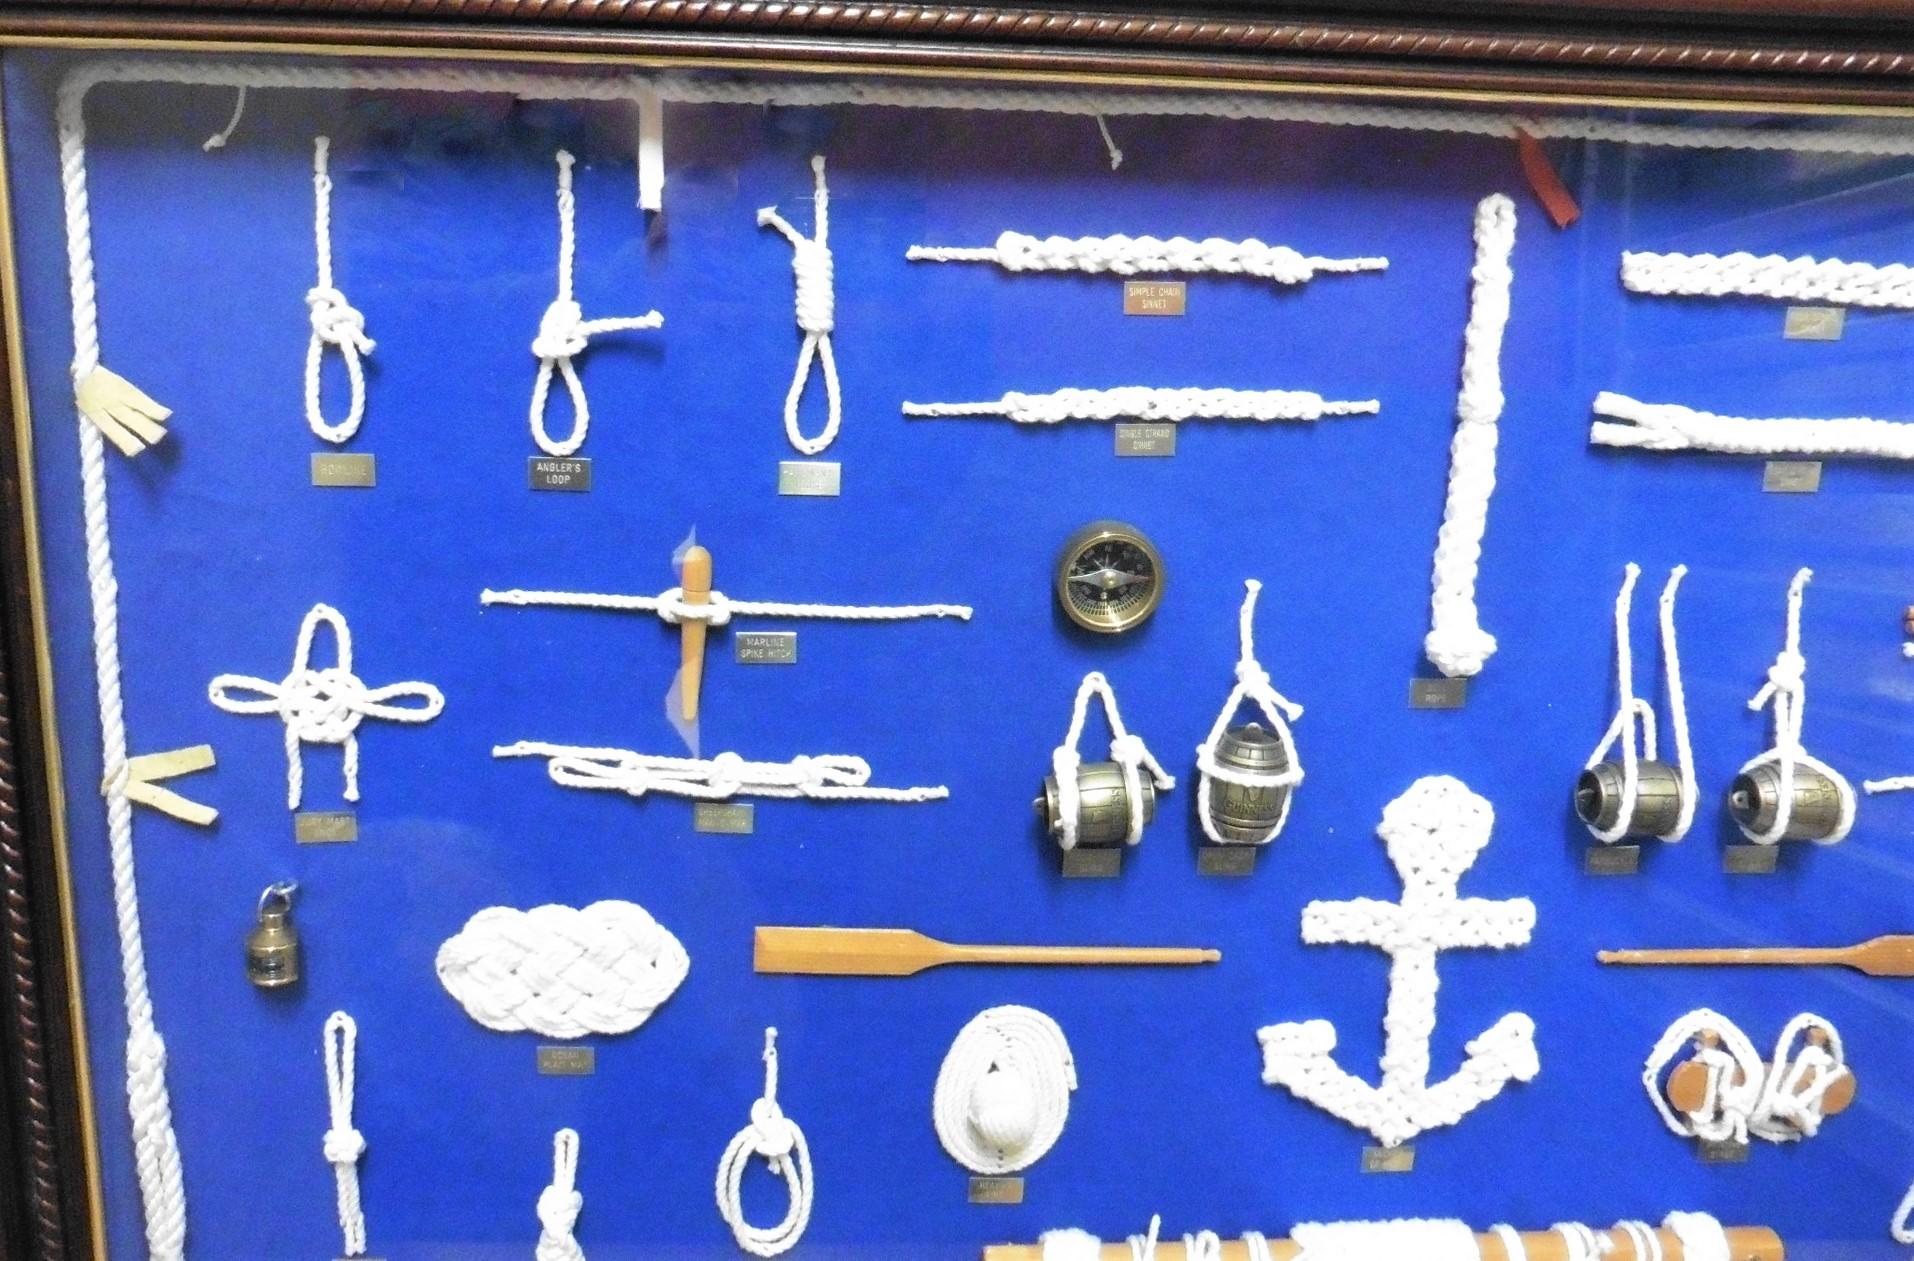 Marine Knot board by Captain D.J.Walker


A fine example of a marine specimen board with a 'mahogany' surround. Samples of numerous marine knots, sextant, binnacle, compass, oars, plumb lines, ships wheel, telescope etc. All mounted on a blue